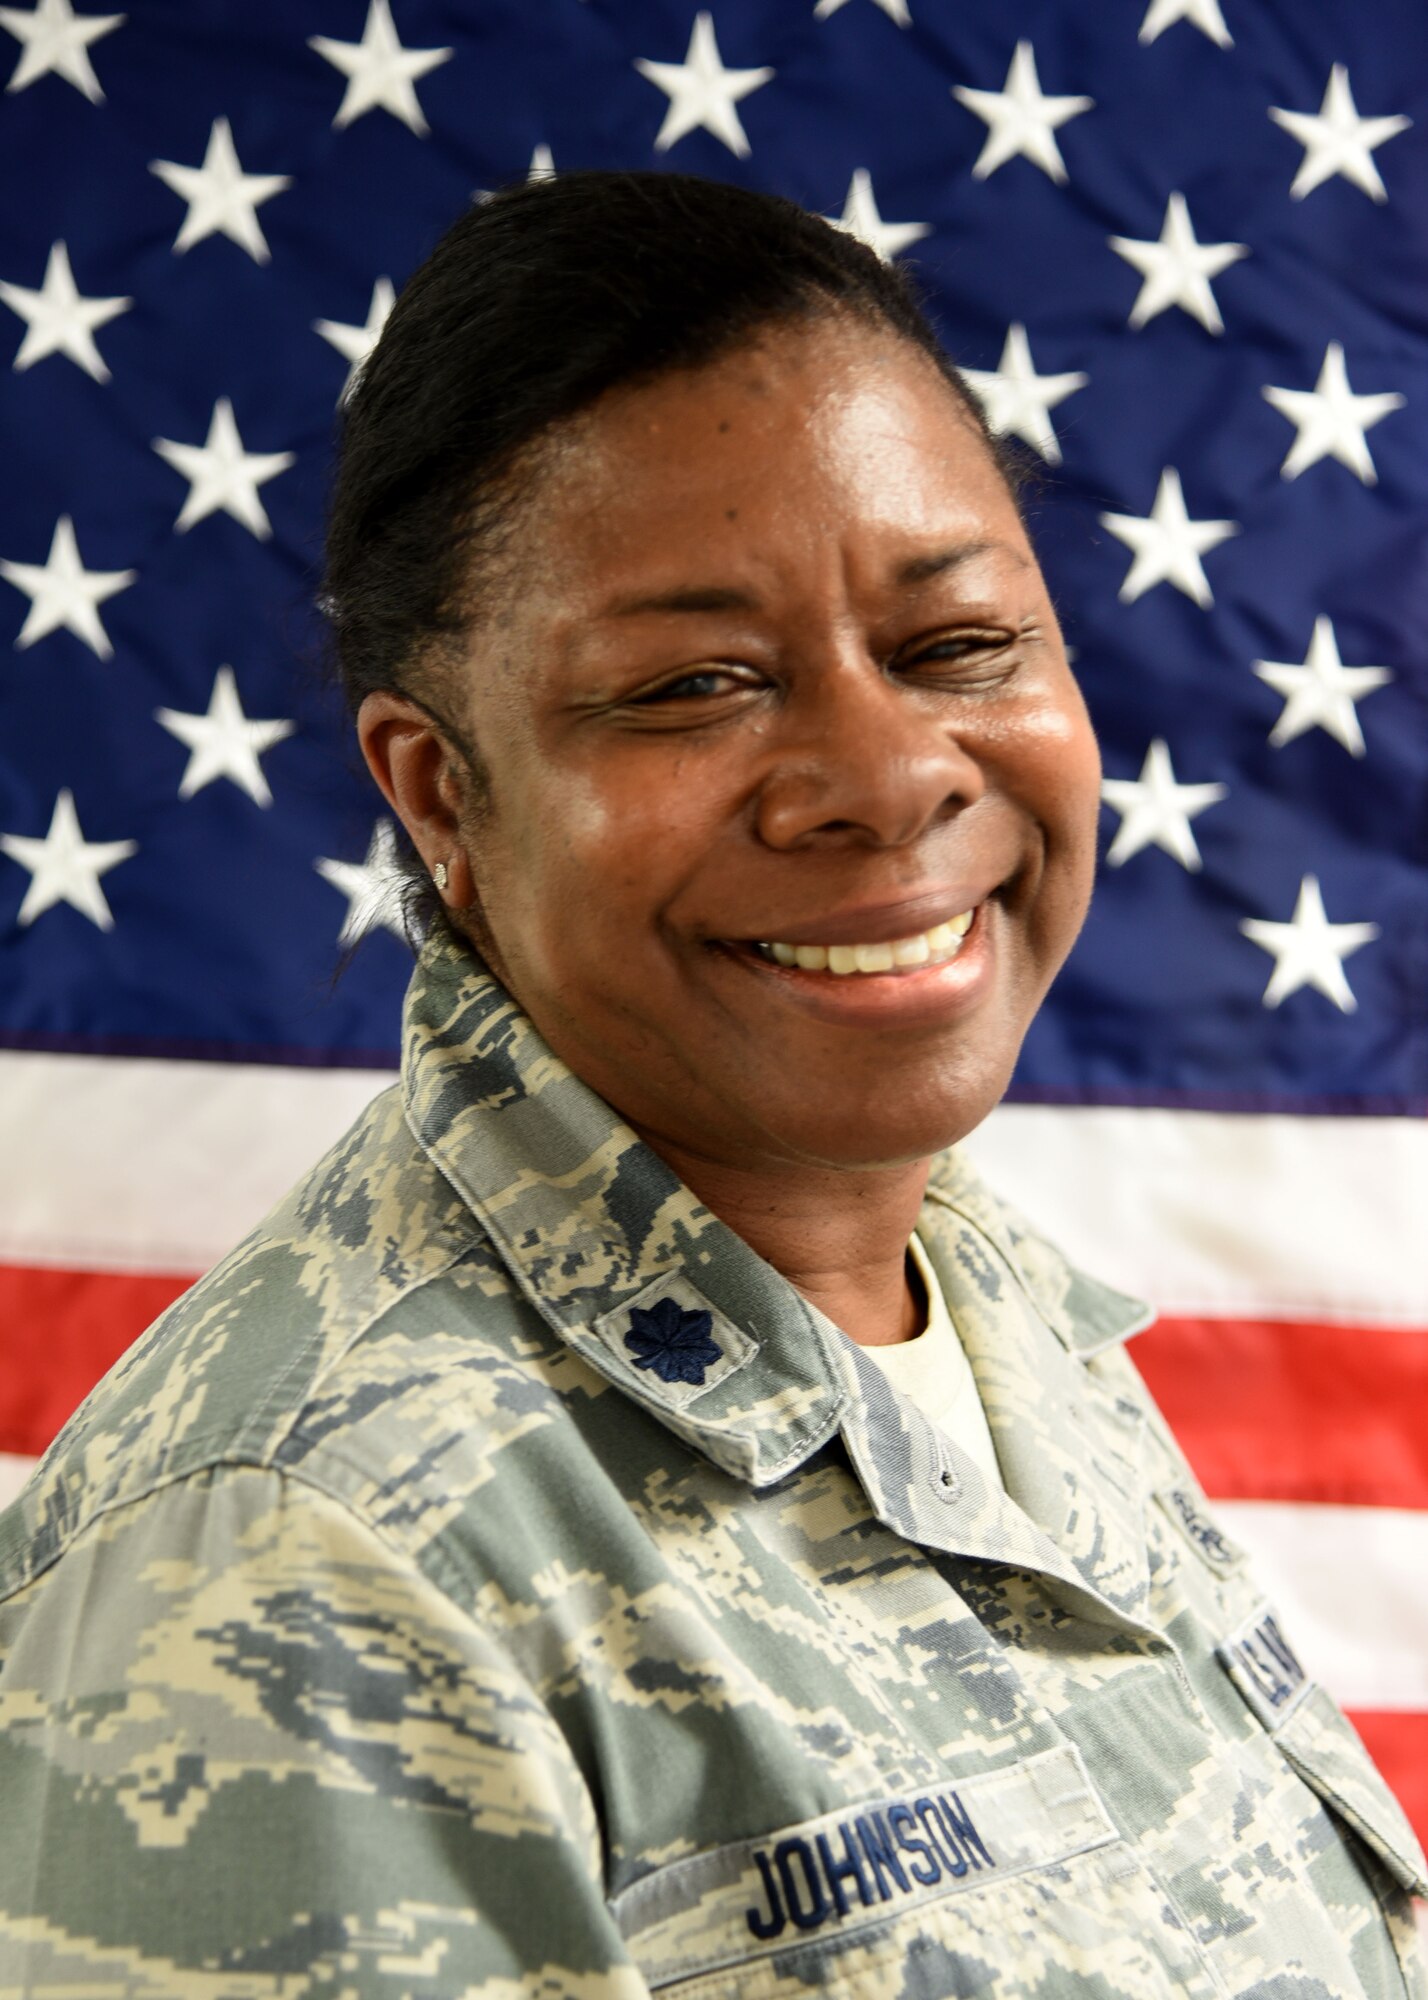 Lt. Col. Rosalind Johnson, 36th Aeromedical Evacuation Squadron, participated in Patriot Warrior Aug. 8-22, 2018. Patriot Warrior is an Air Force Reserve Command exercise that provides an opportunity for Reserve Citizen Airmen to train with joint and international partners in airlift, aeromedical evacuation and mobility support operations. (U.S. Air Force photo/Maj. Marnee A.C. Losurdo)